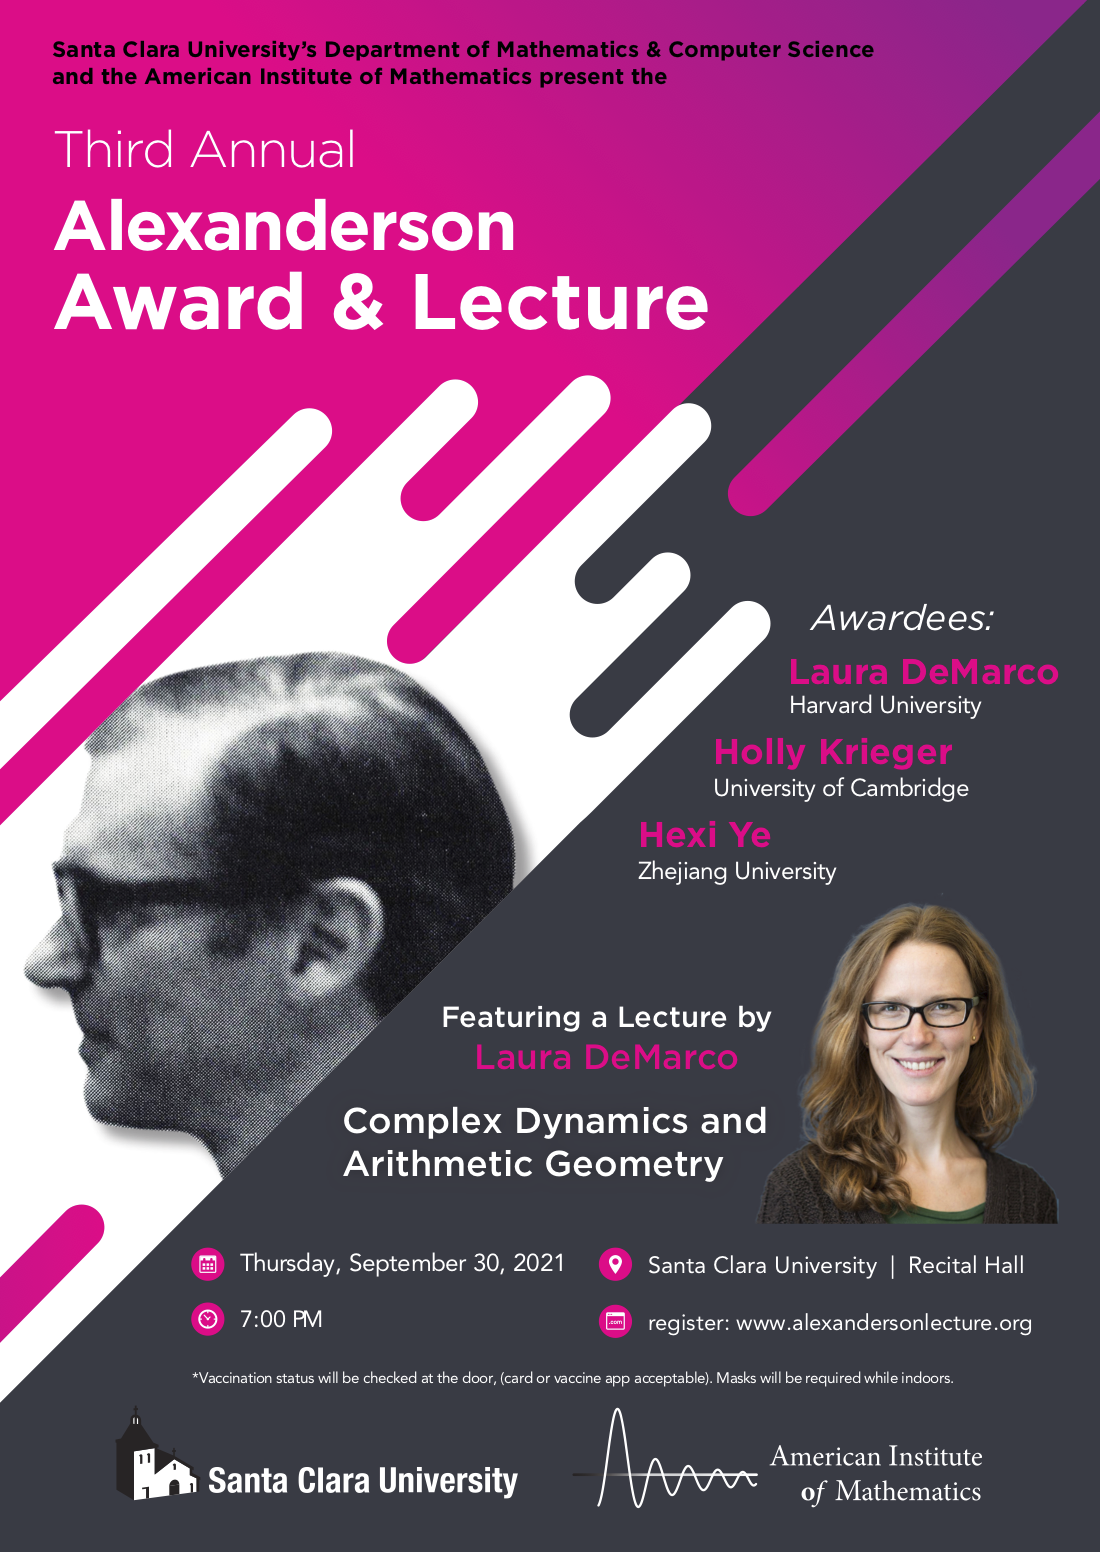 poster announcing the 2021 Alexanderson lecture 'Complex Dynamics and Arithmetic Geometry' by Laura DeMarco, to take place at 7pm on Thursday September 20 at Santa Clara University.